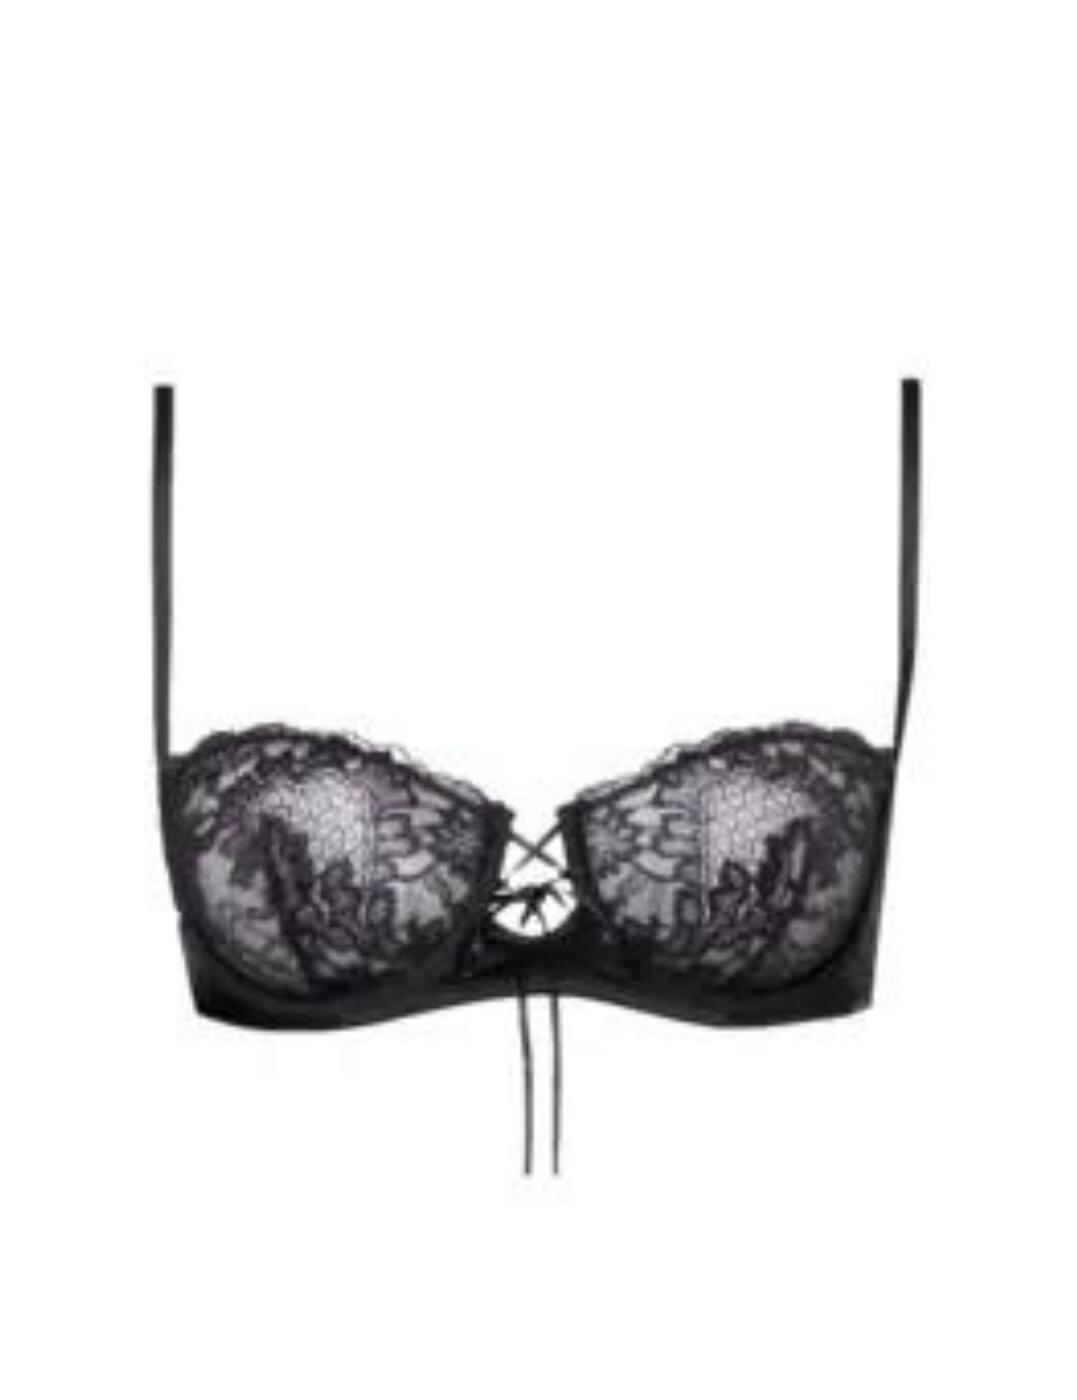 Calvin Klein Perfectly Fit Strapless Push-Up Bra - Belle Ligerie